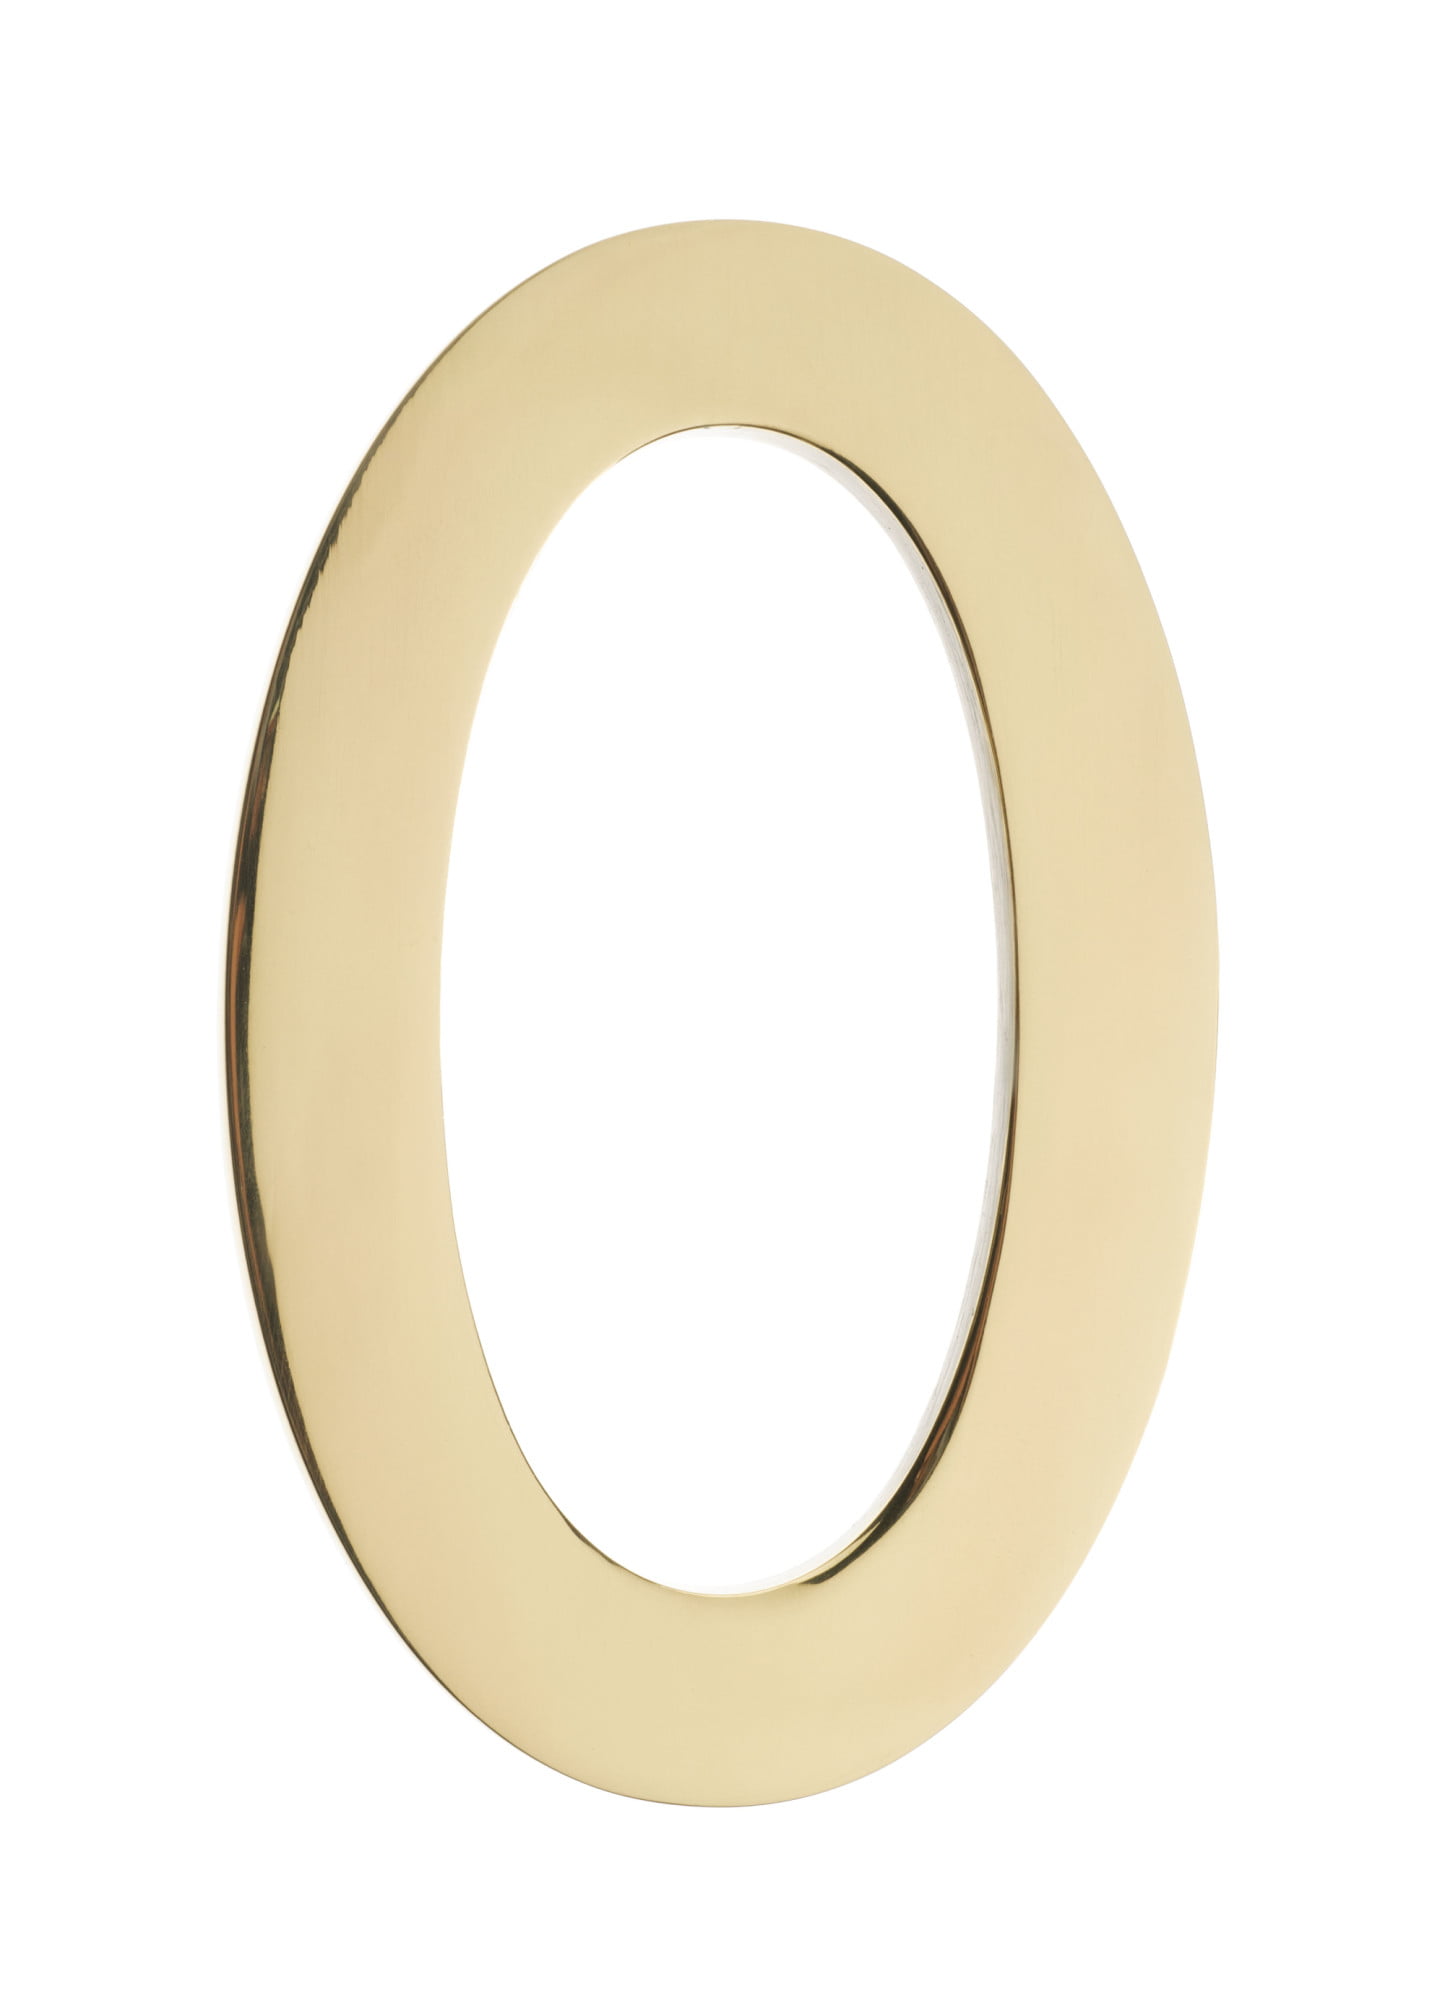 House Number 0, Polished Brass - 5 In.